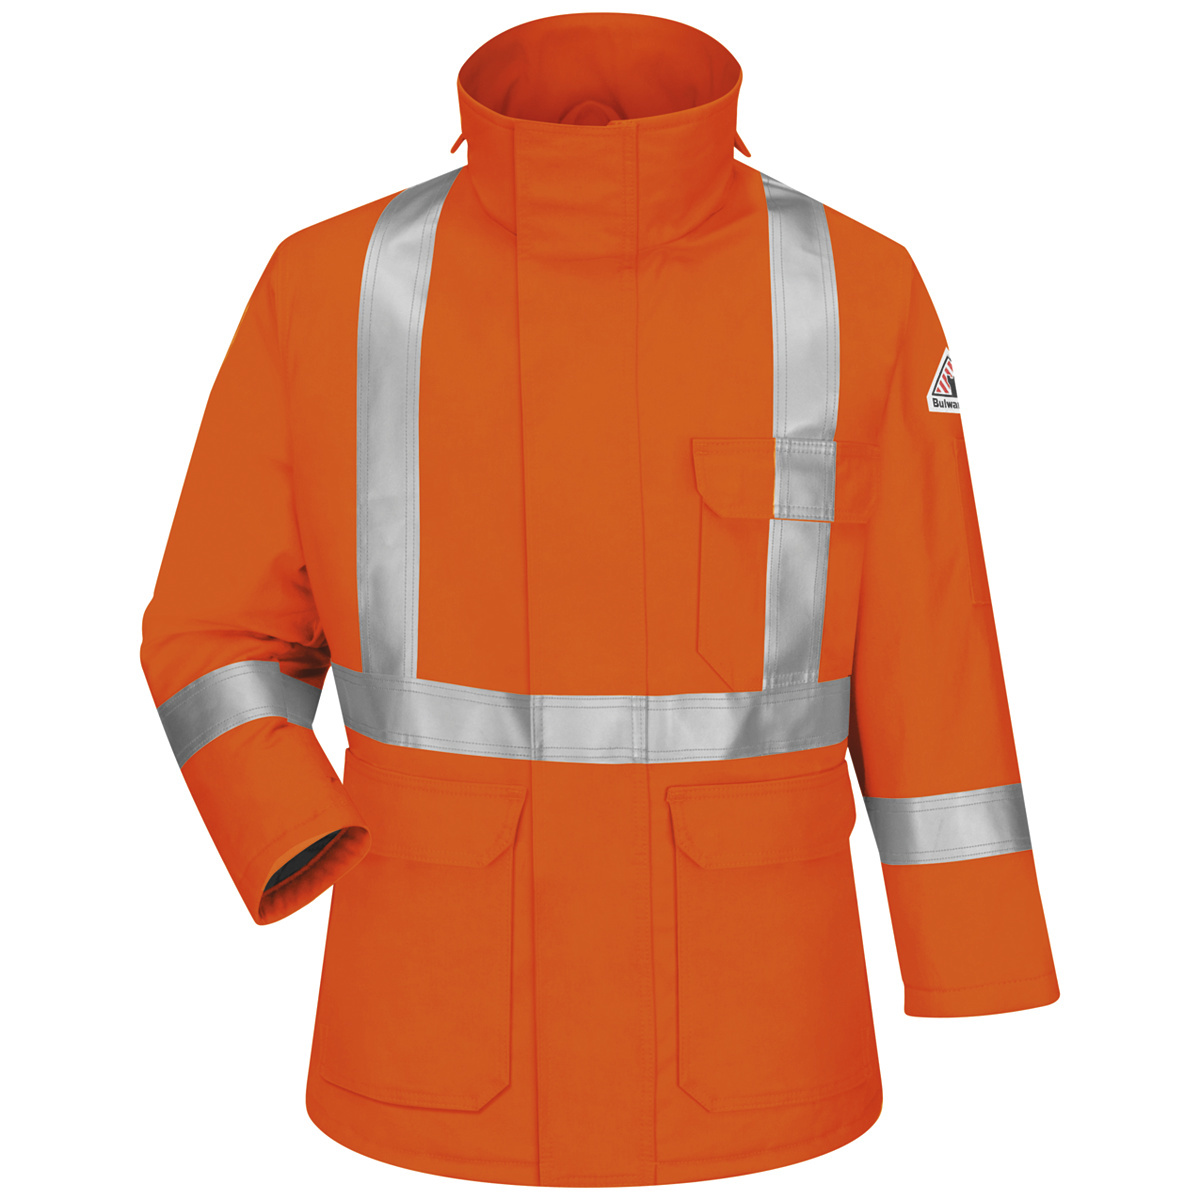 Bulwark® 2X Tall Orange Westex Ultrasoft® Twill/Cotton/Nylon Water Repellent Flame Resistant Parka With Cotton Lining And Zipper